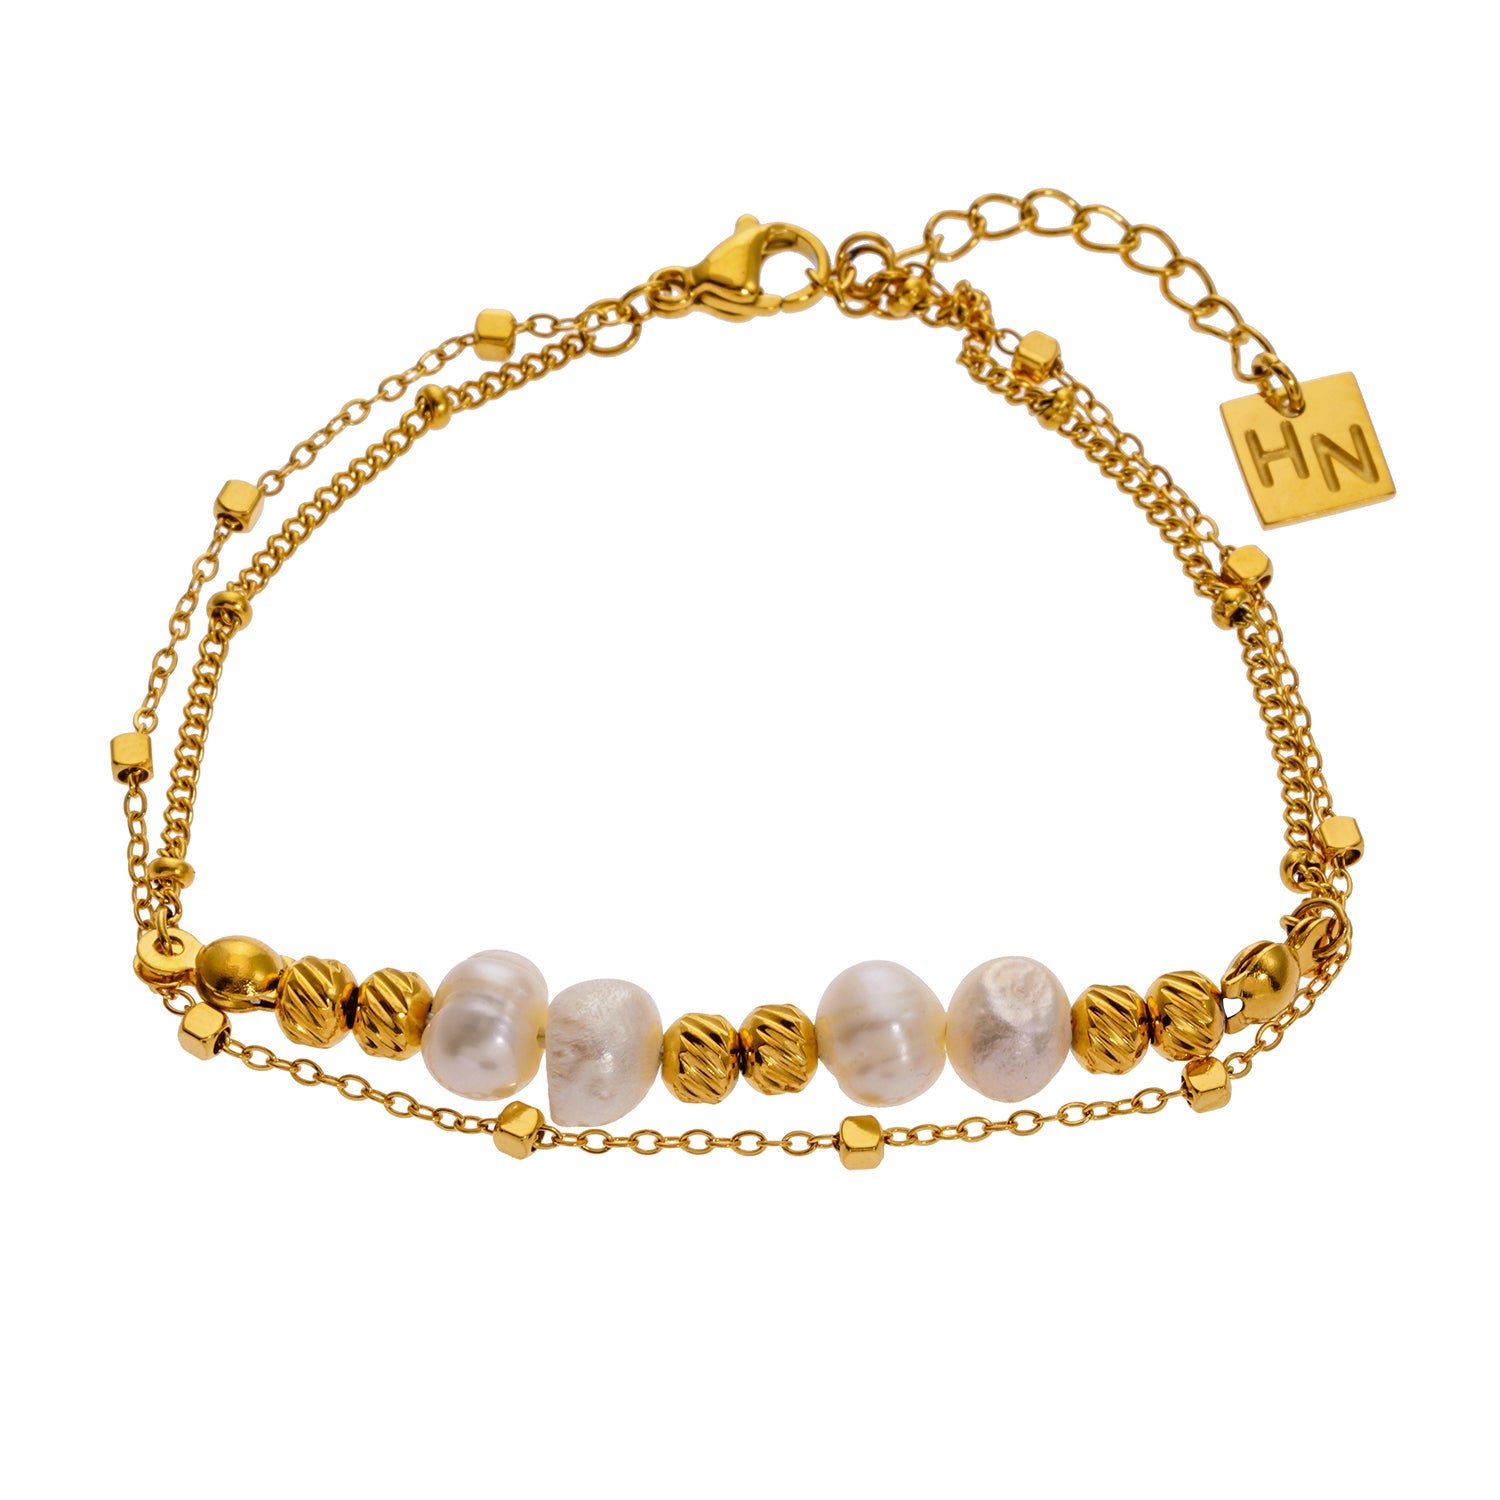 Style MARENTA 3469: Gilded Harmony Chain Bracelet with Gold Beads and Freshwater Pearls.